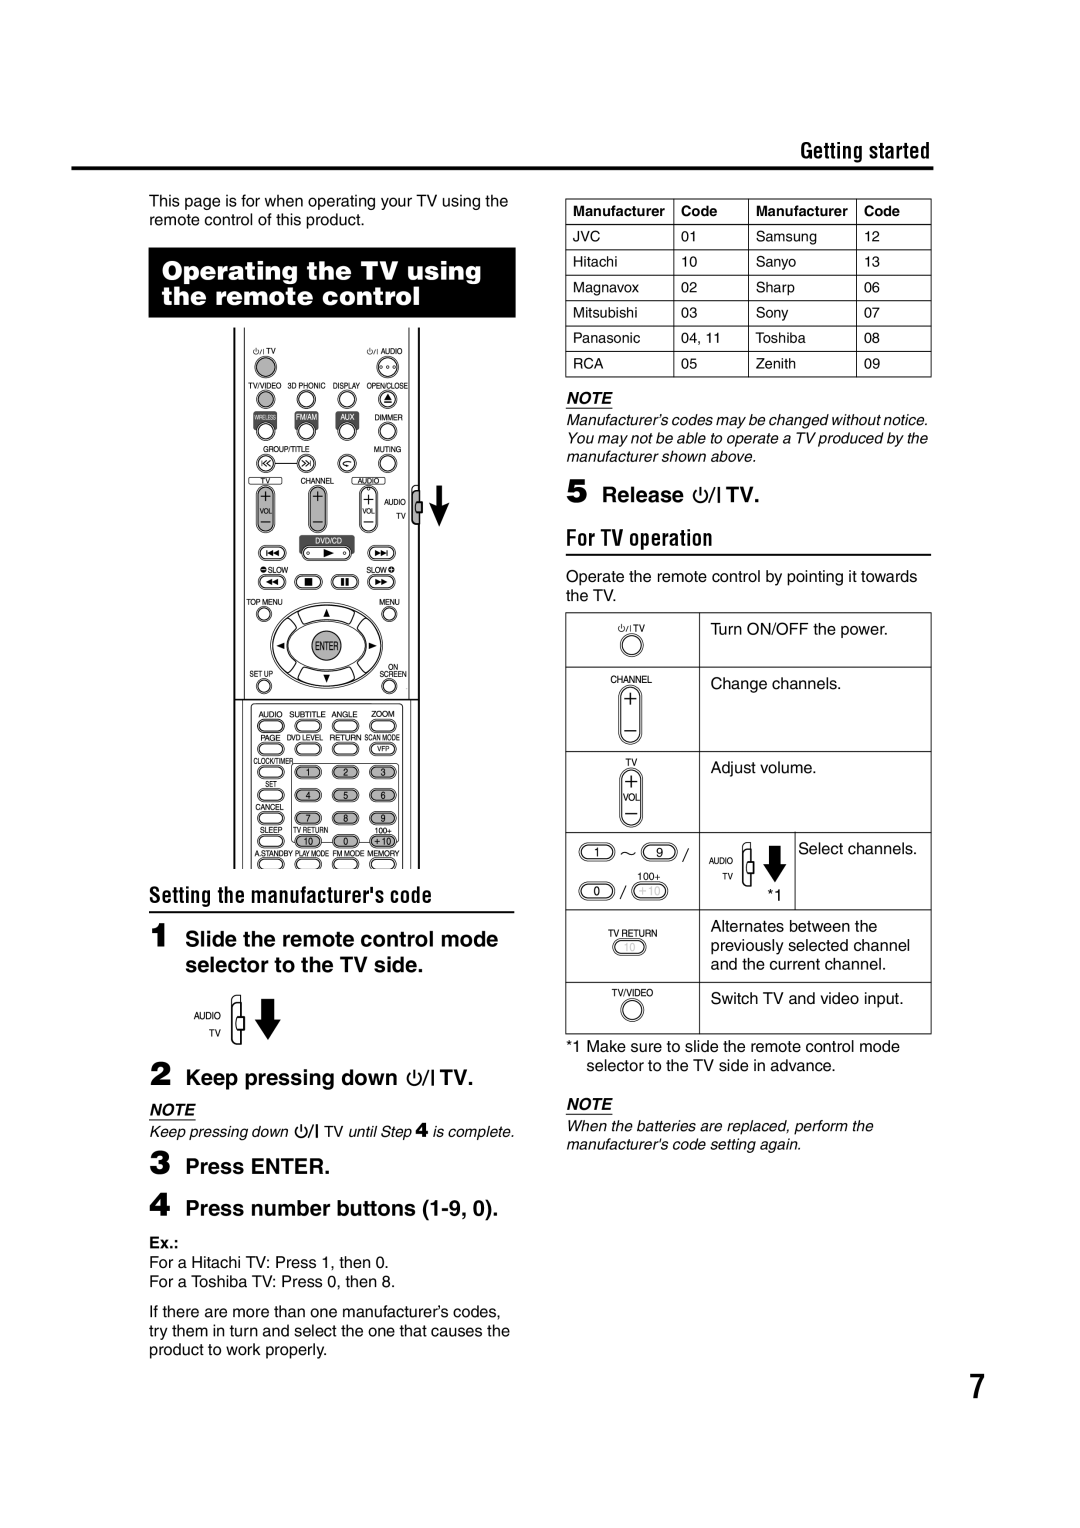 JVC GVT0144-005A manual Operating the TV using the remote control, Setting the manufacturers code, Keep pressing down TV 